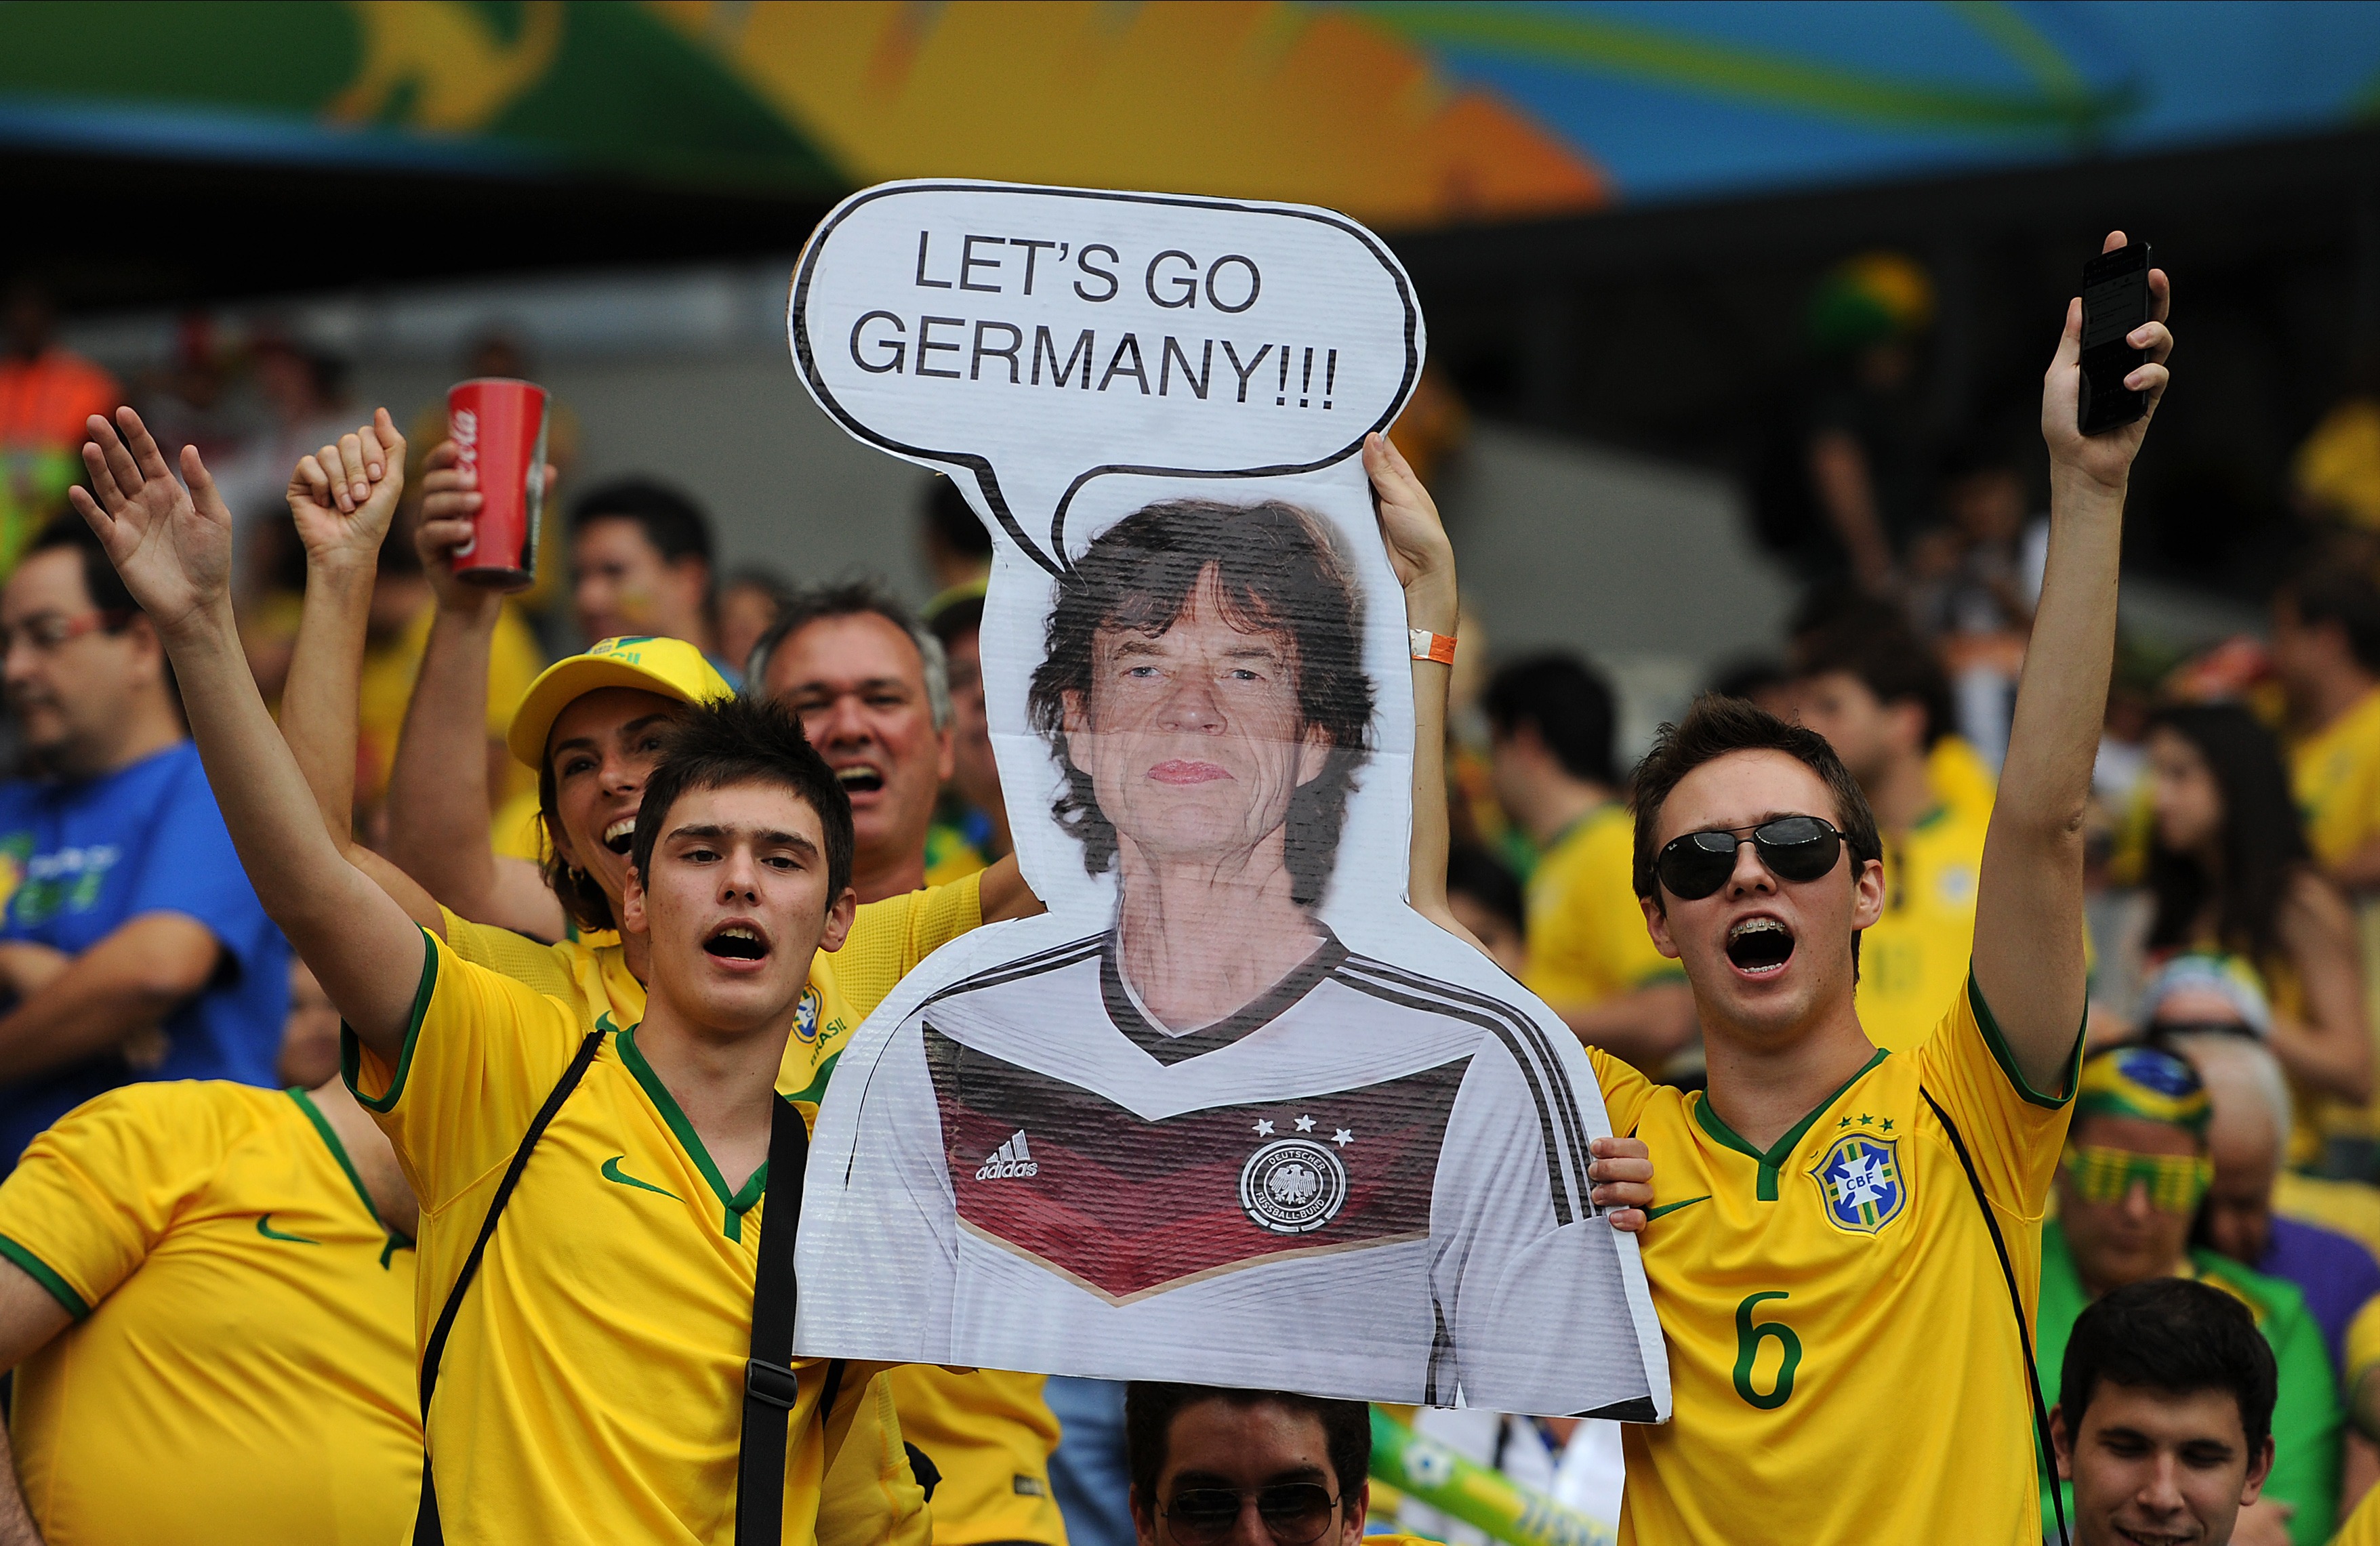 Brazil fans hold up a poster of Mick Jagger during the World Cup semifinal match between Brazil and Germany in Belo Horizonte, Brazil, on July 8, 2014 (Chris Brunskill Ltd/Getty)